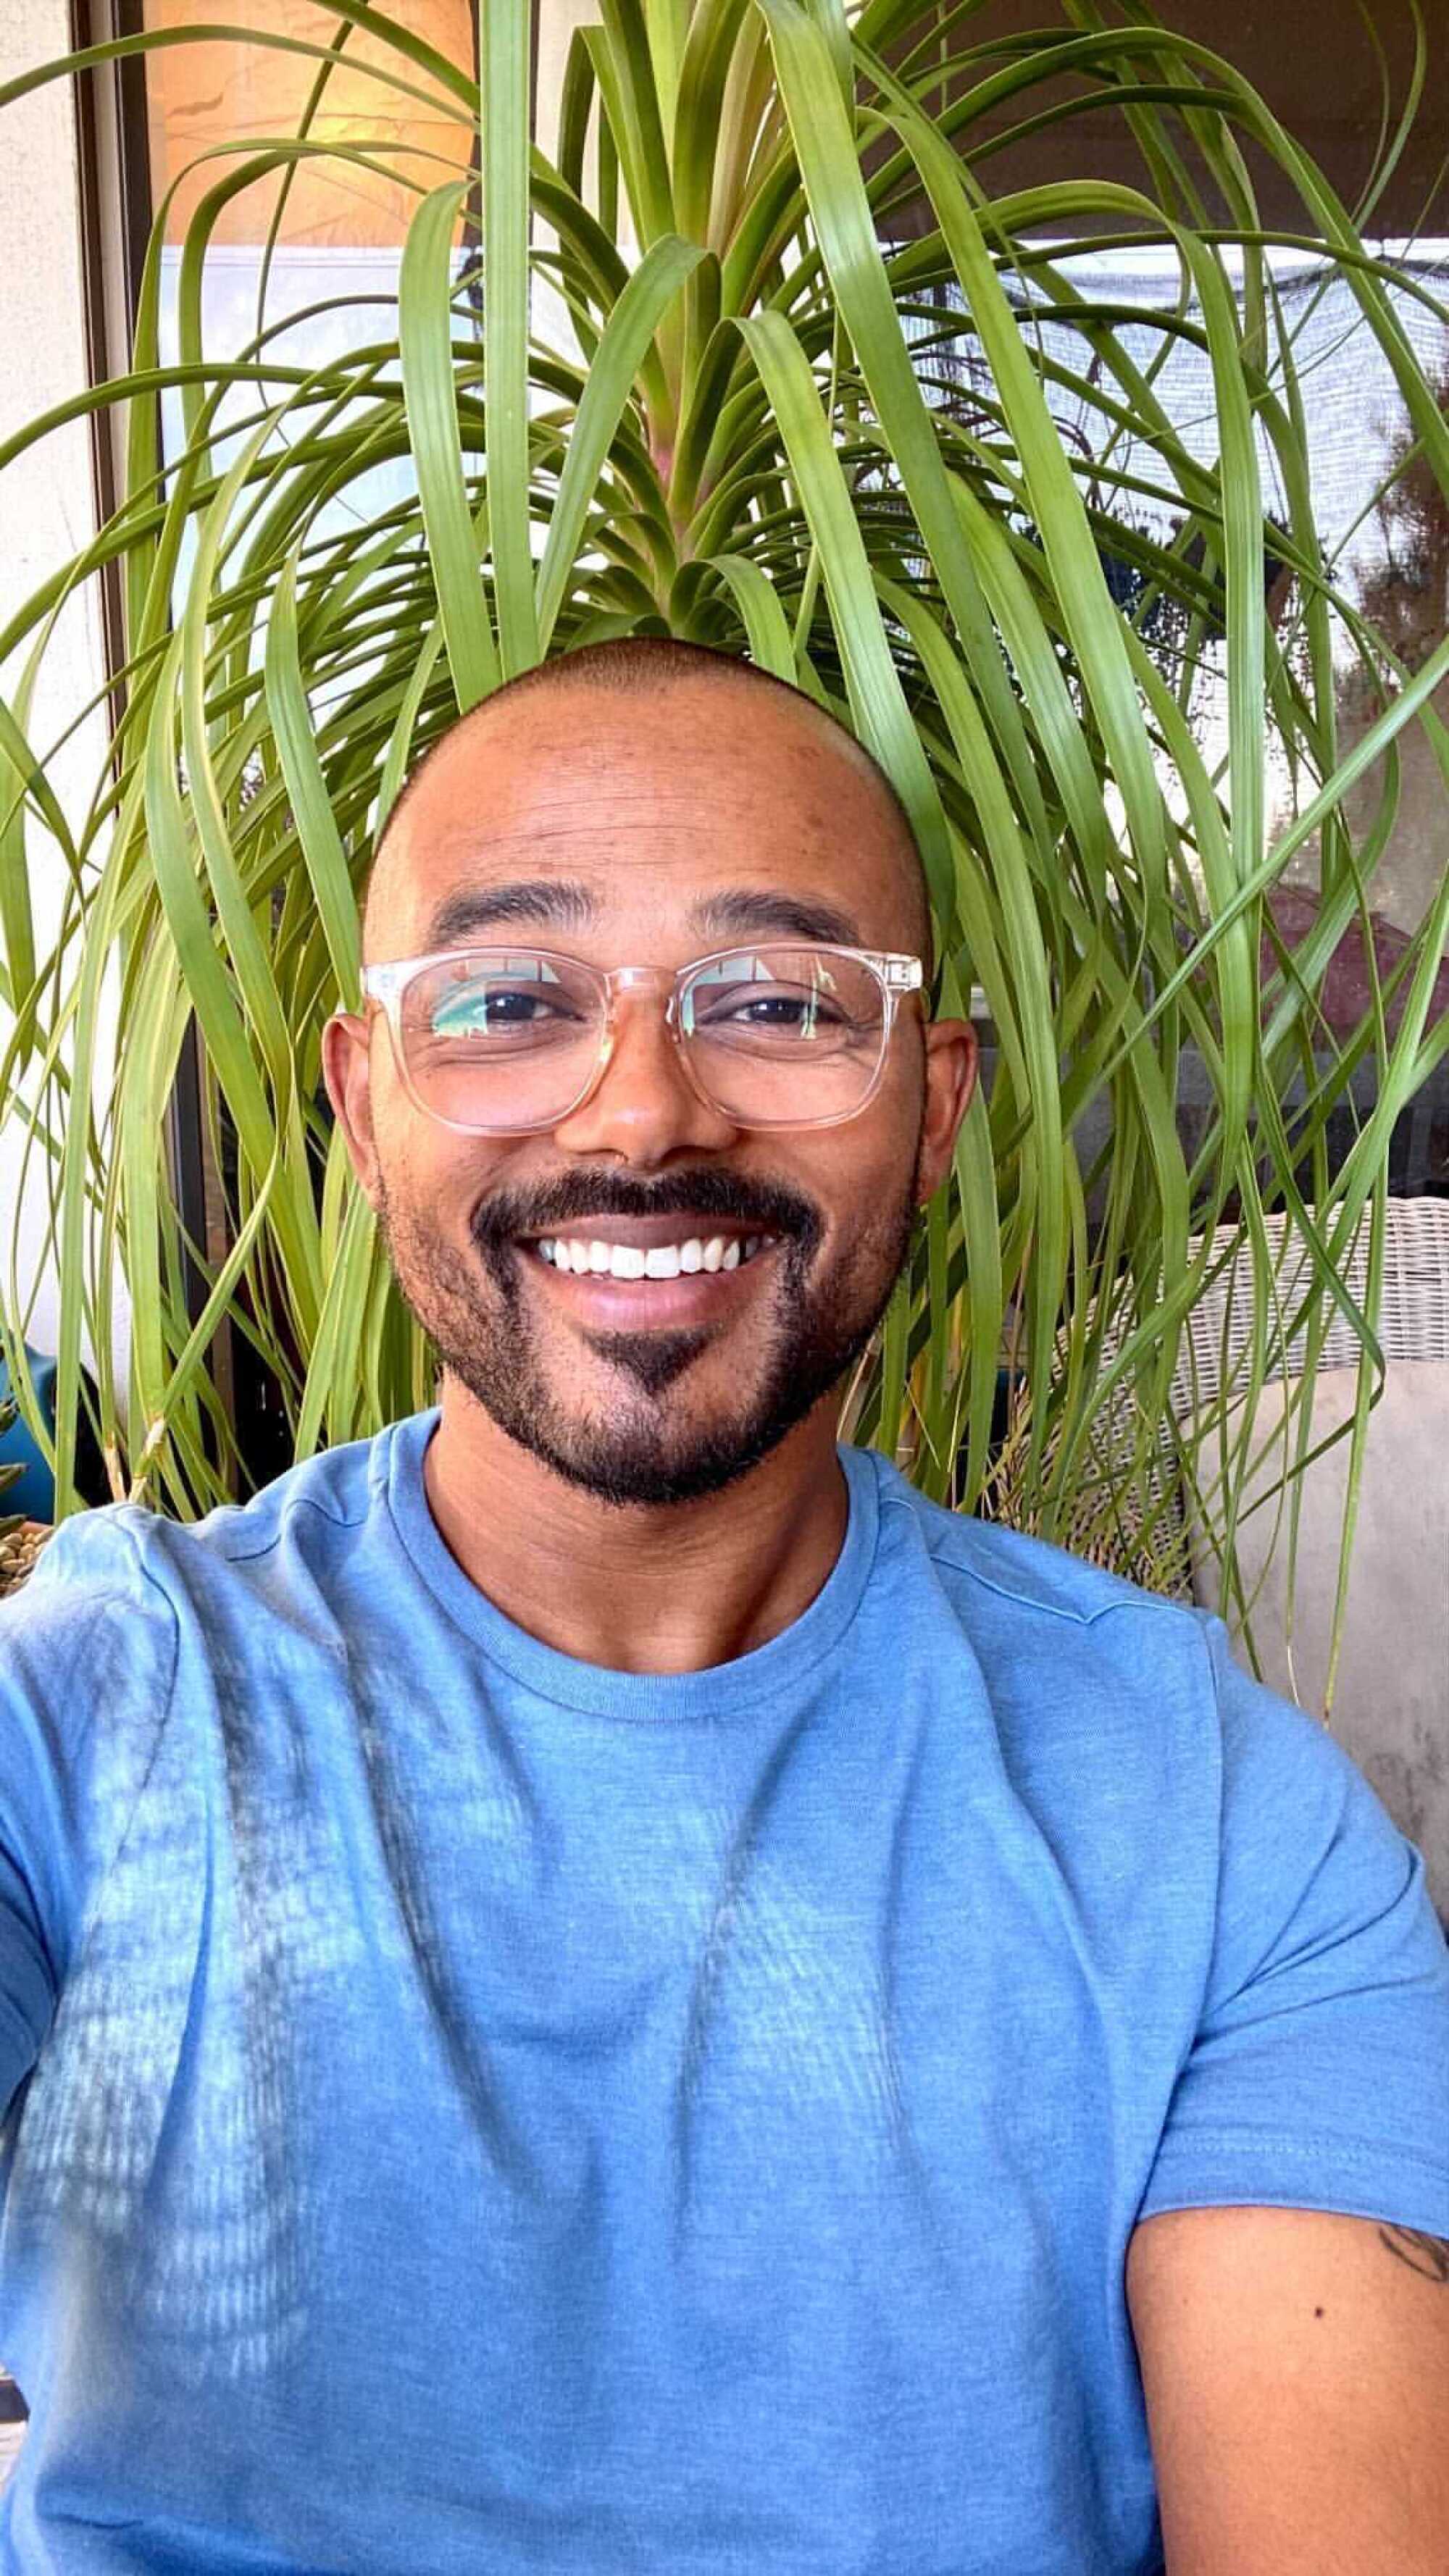 A smiling man wearing clear-framed glasses and a blue T-shirt, in front of a hanging plant.